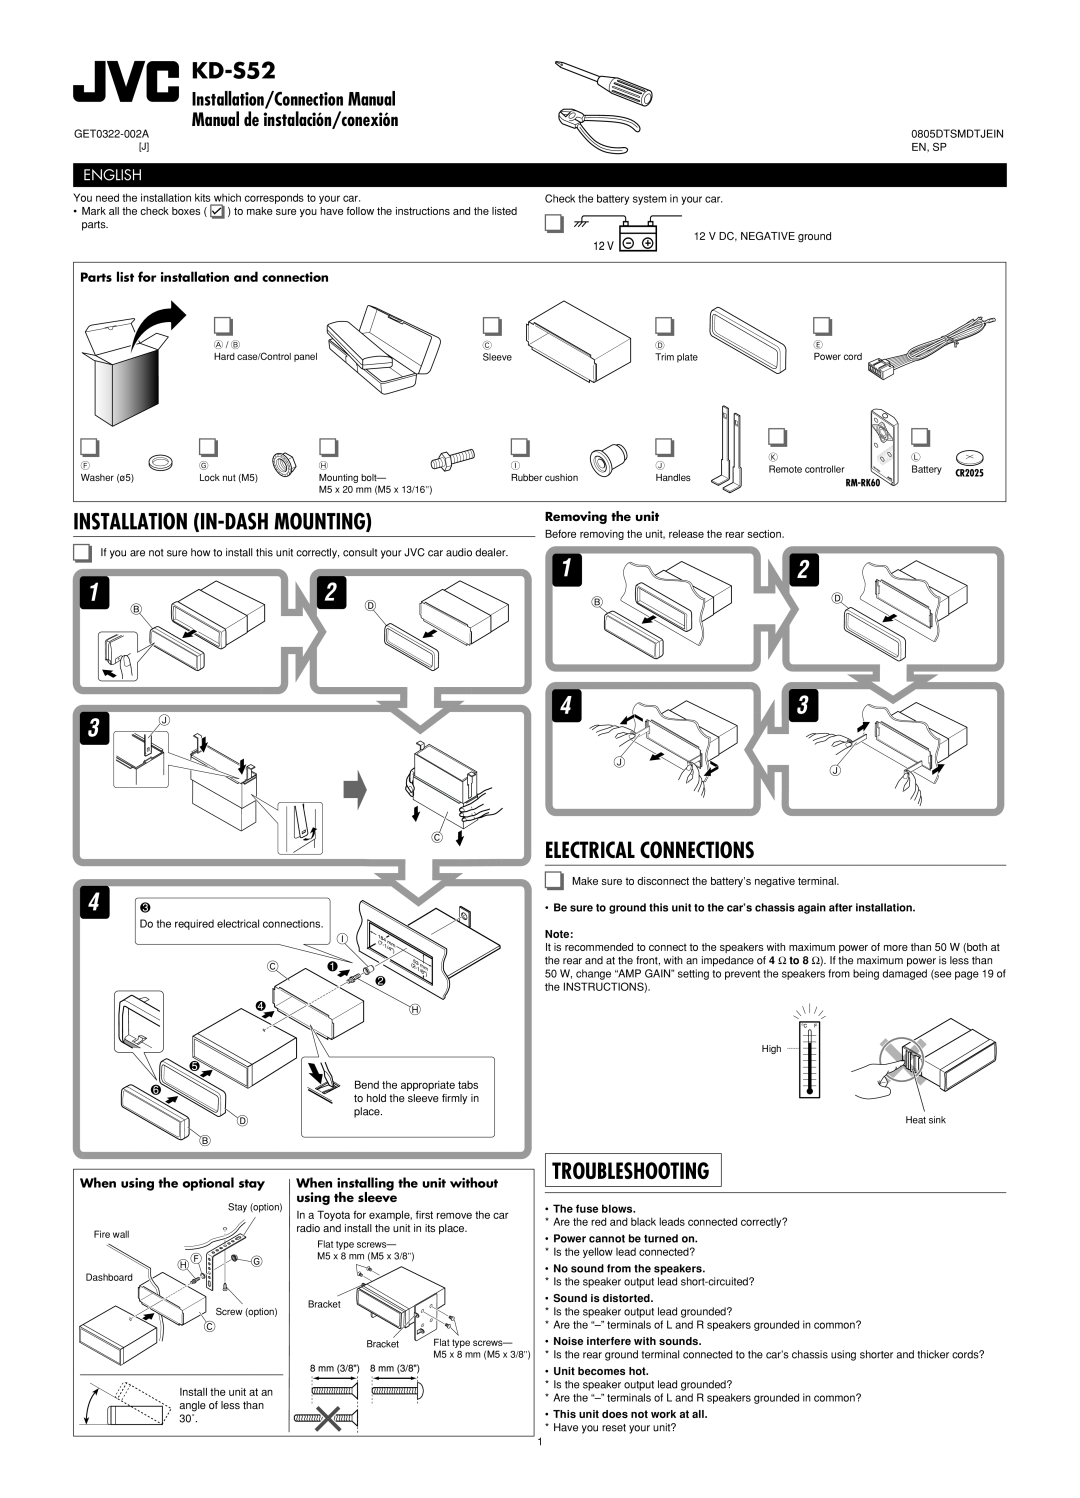 JVC KD-S52 Installation In-Dashmounting, Electrical Connections, Troubleshooting, Installation/Connection Manual, English 